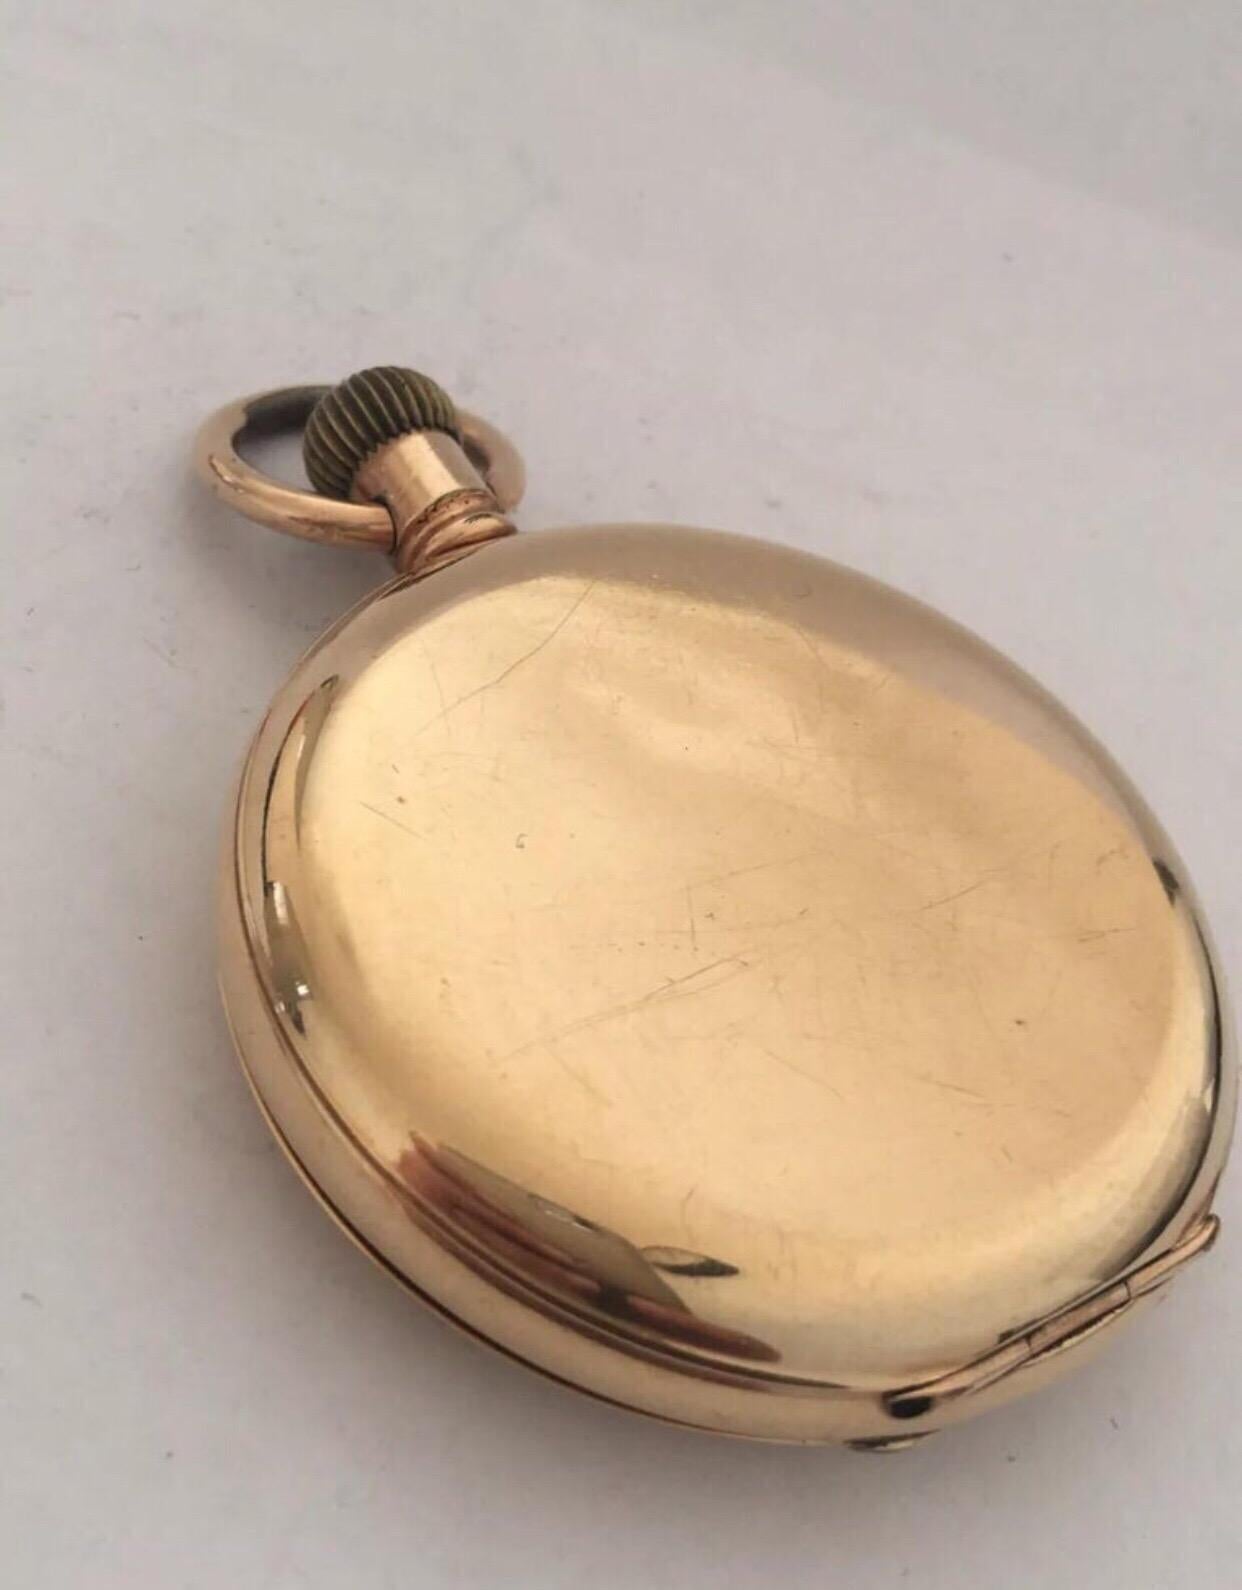 Antique Full Hunter Royal A.W.W. Co. Waltham, Mass Gold Plated Pocket Watch 4